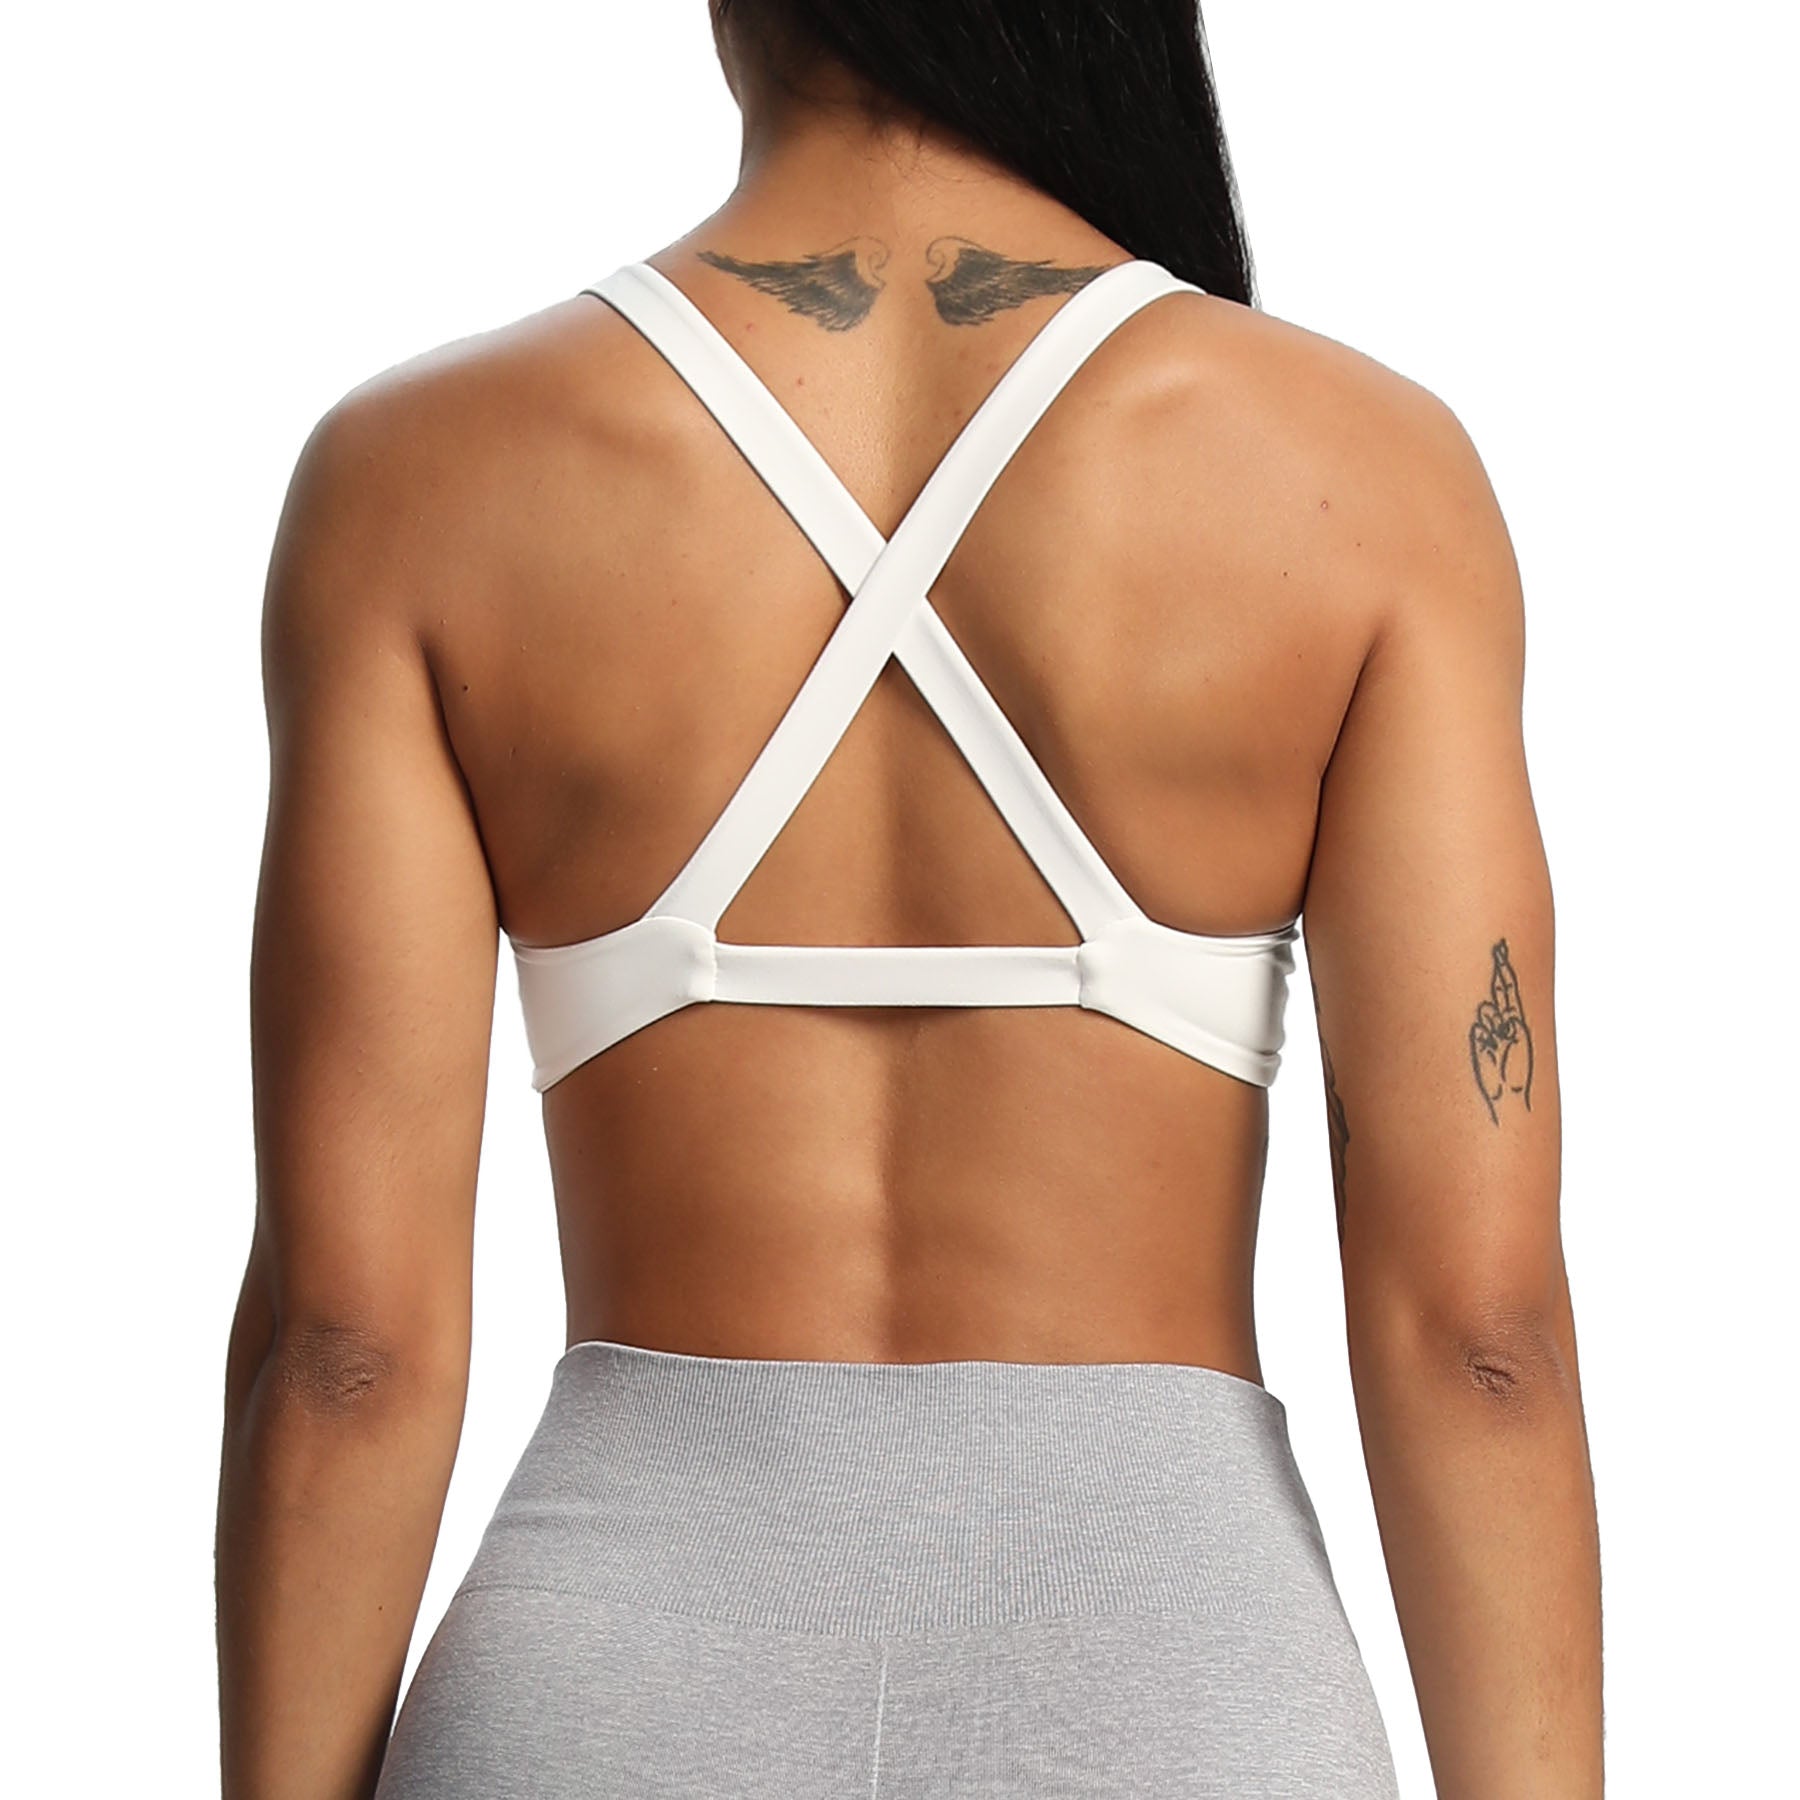 Aoxjox Women's Workout Sports Bras Fitness Backless Padded Halter